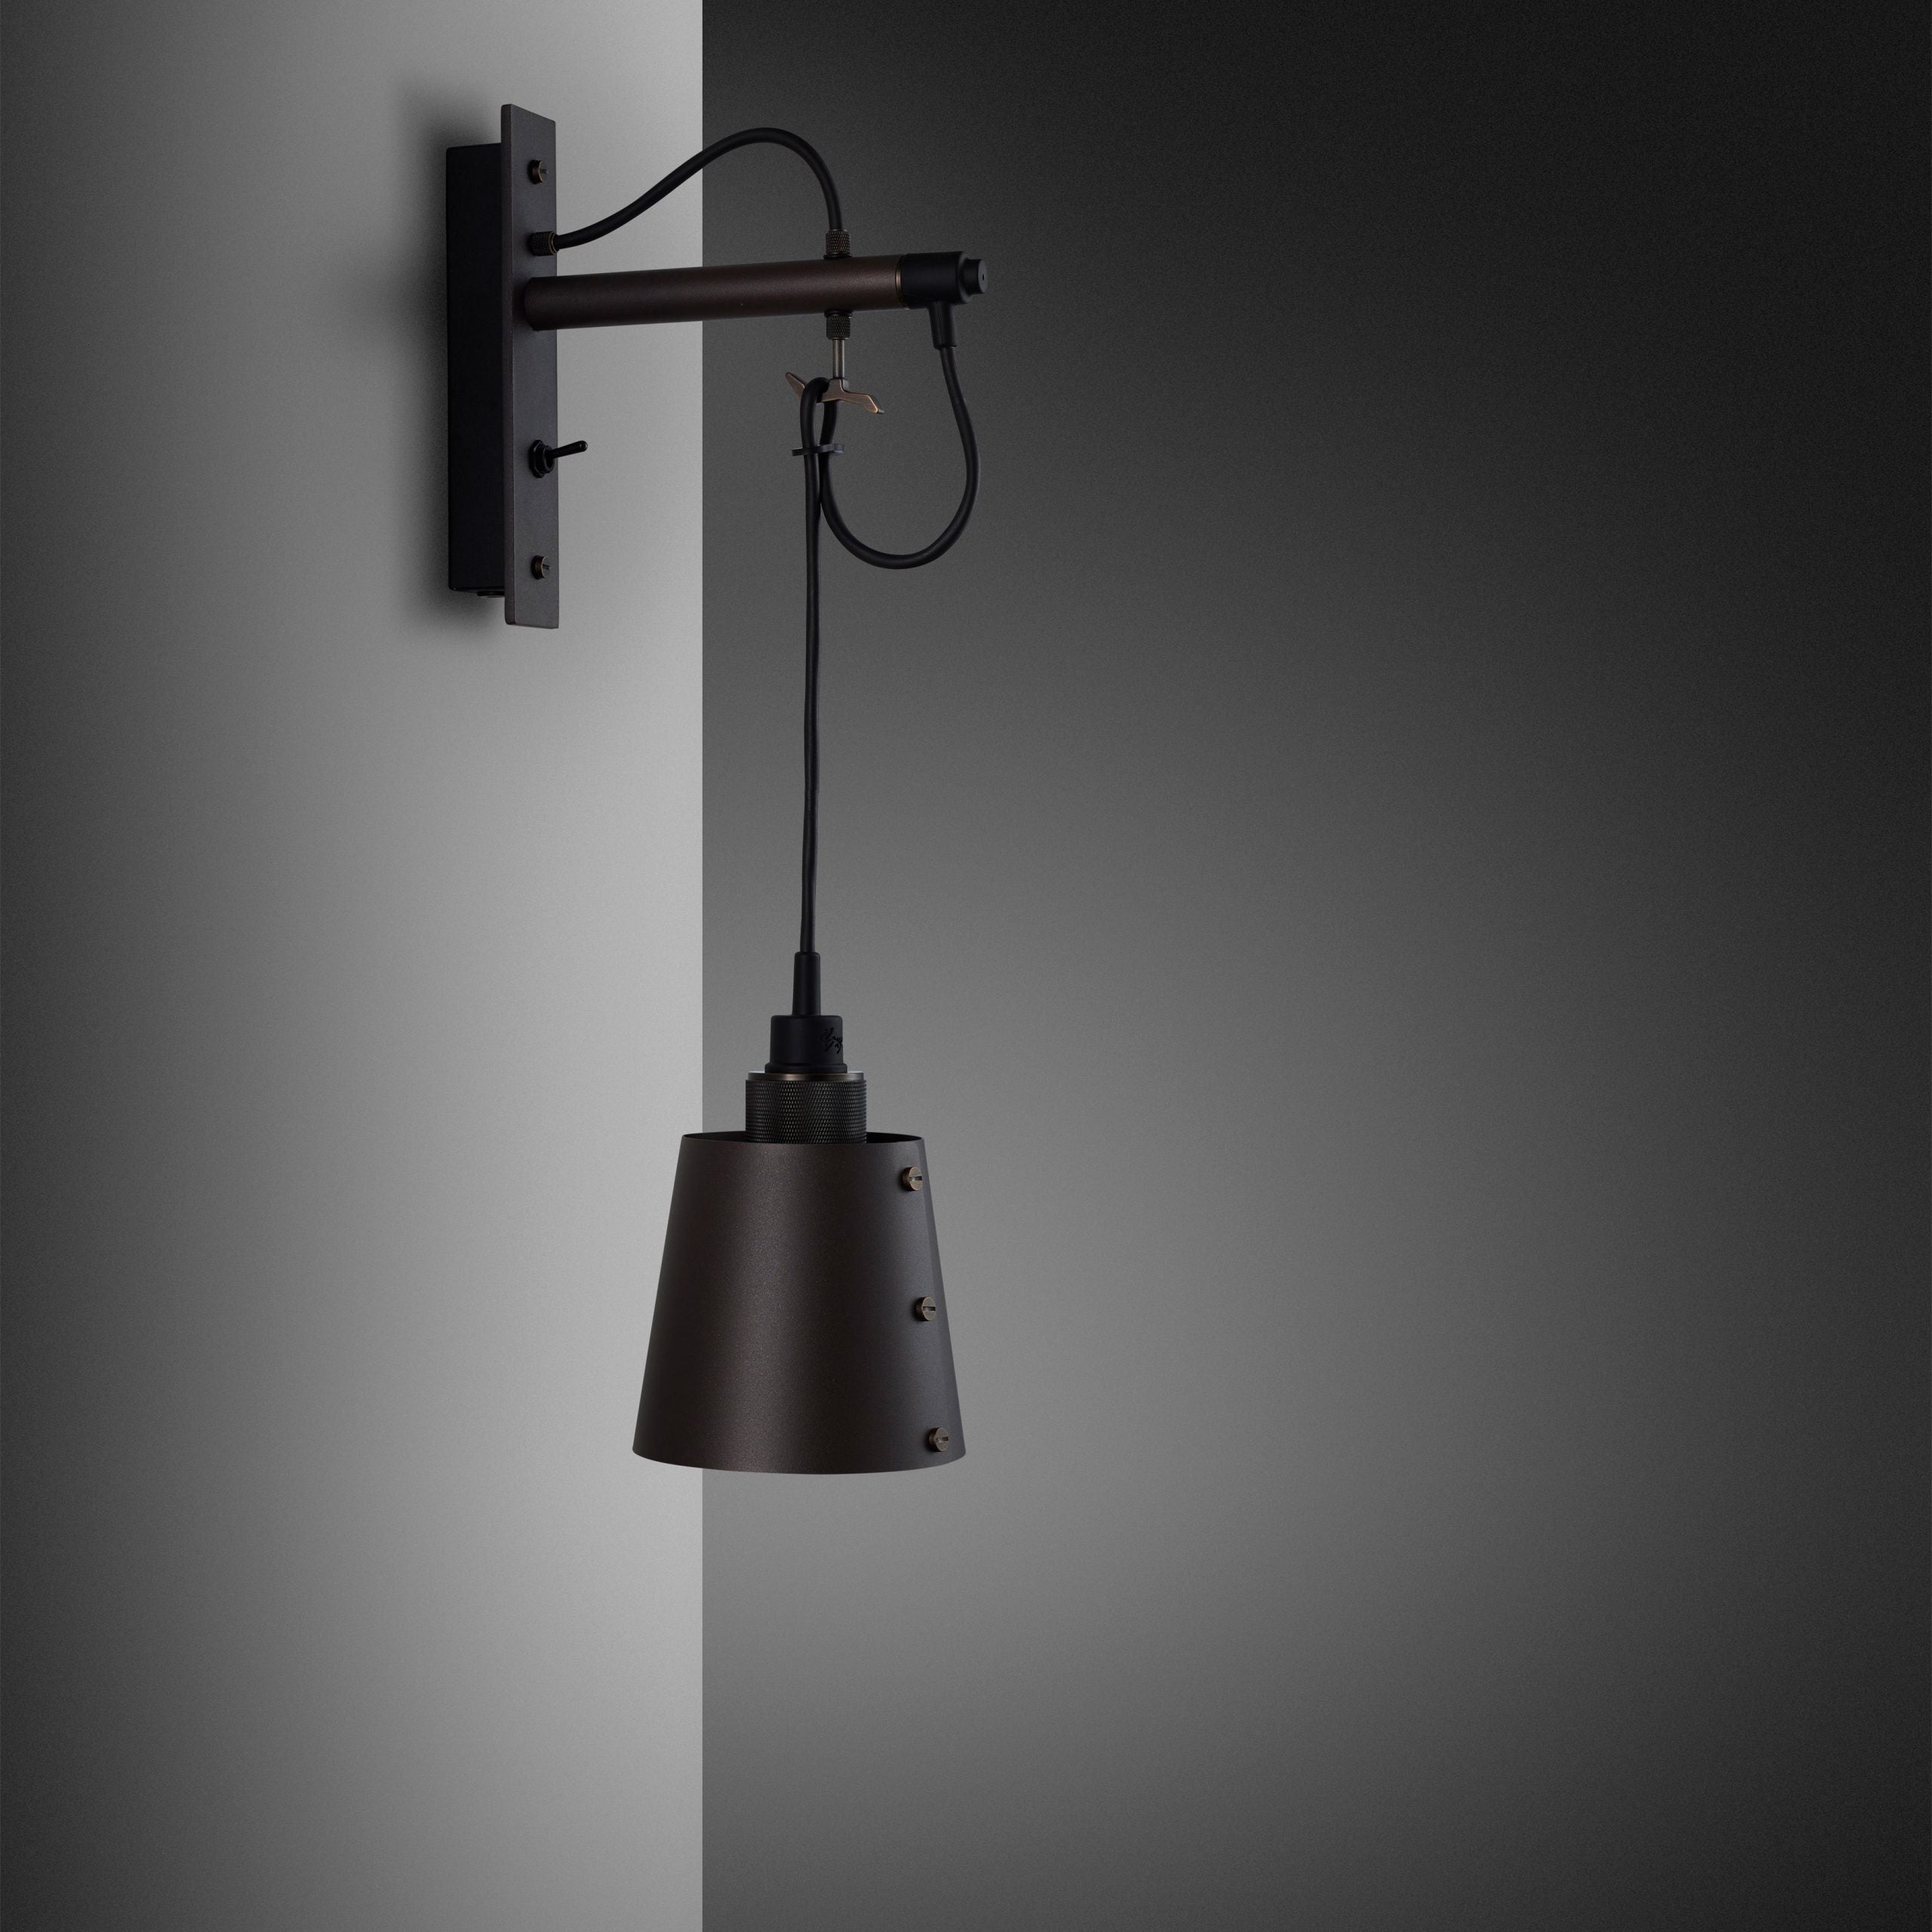 Buster + Punch Hooked Wall Sconce Wall Light Fixtures Buster + Punch Graphite/Smoked Bronze & Graphite Shade Small 